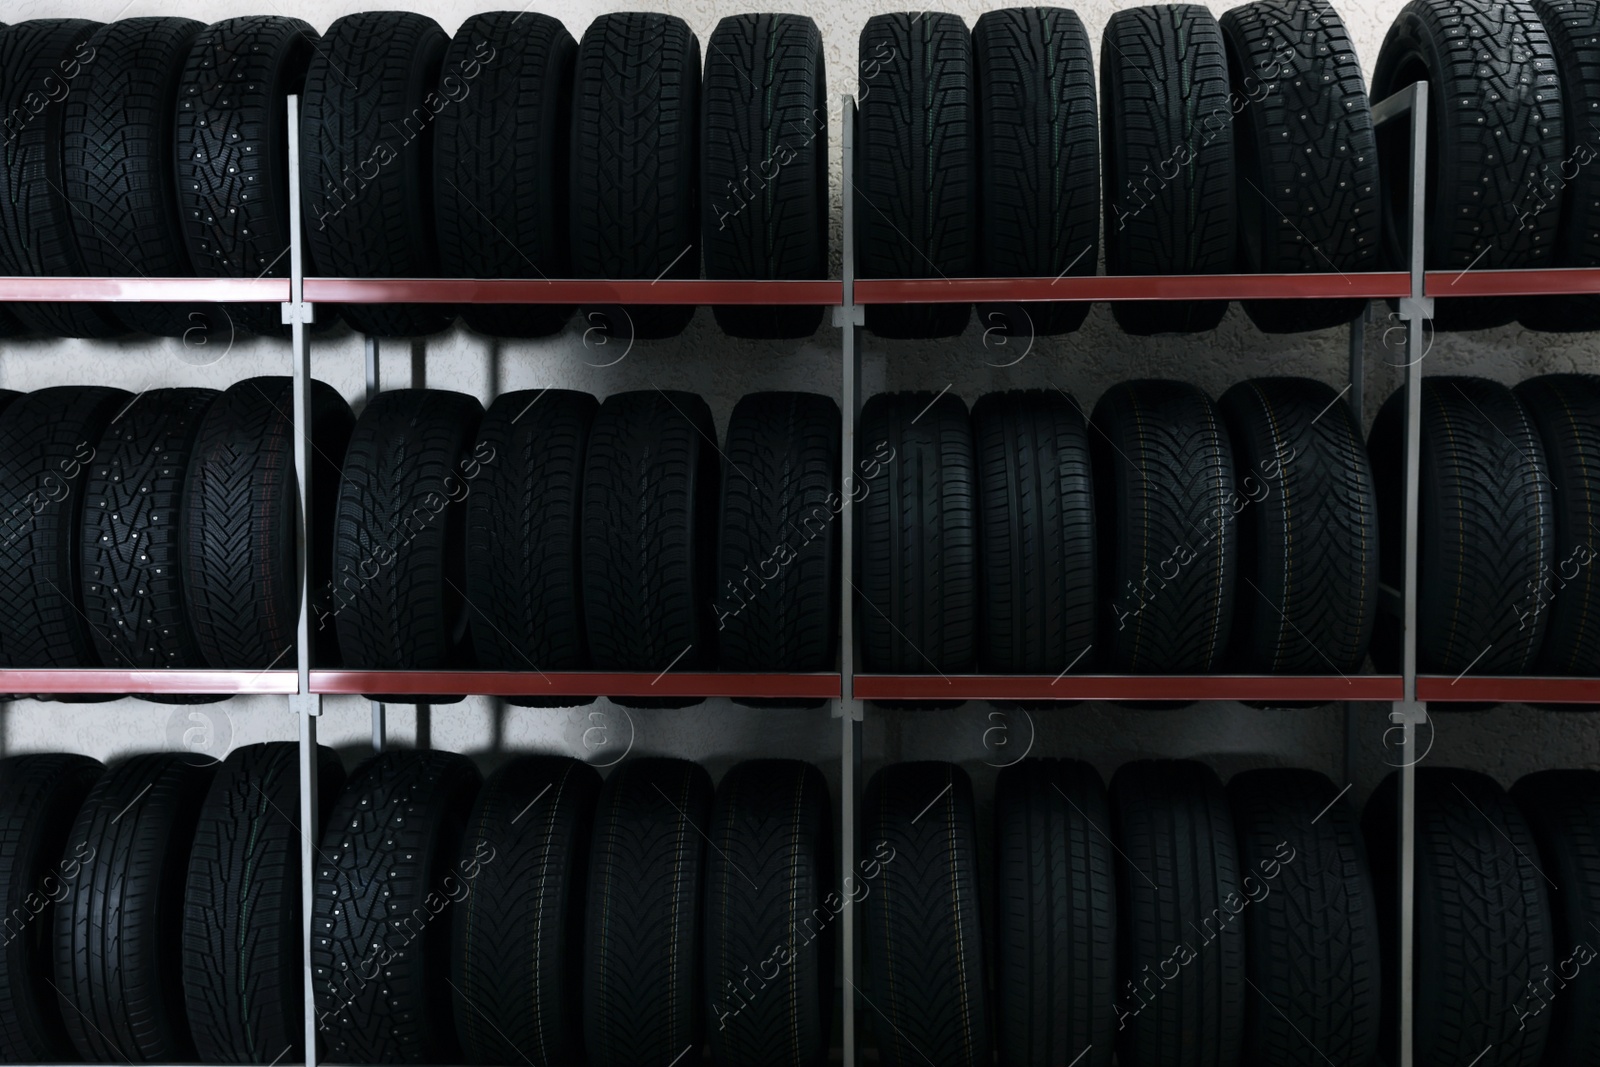 Photo of Car tires on rack in auto store